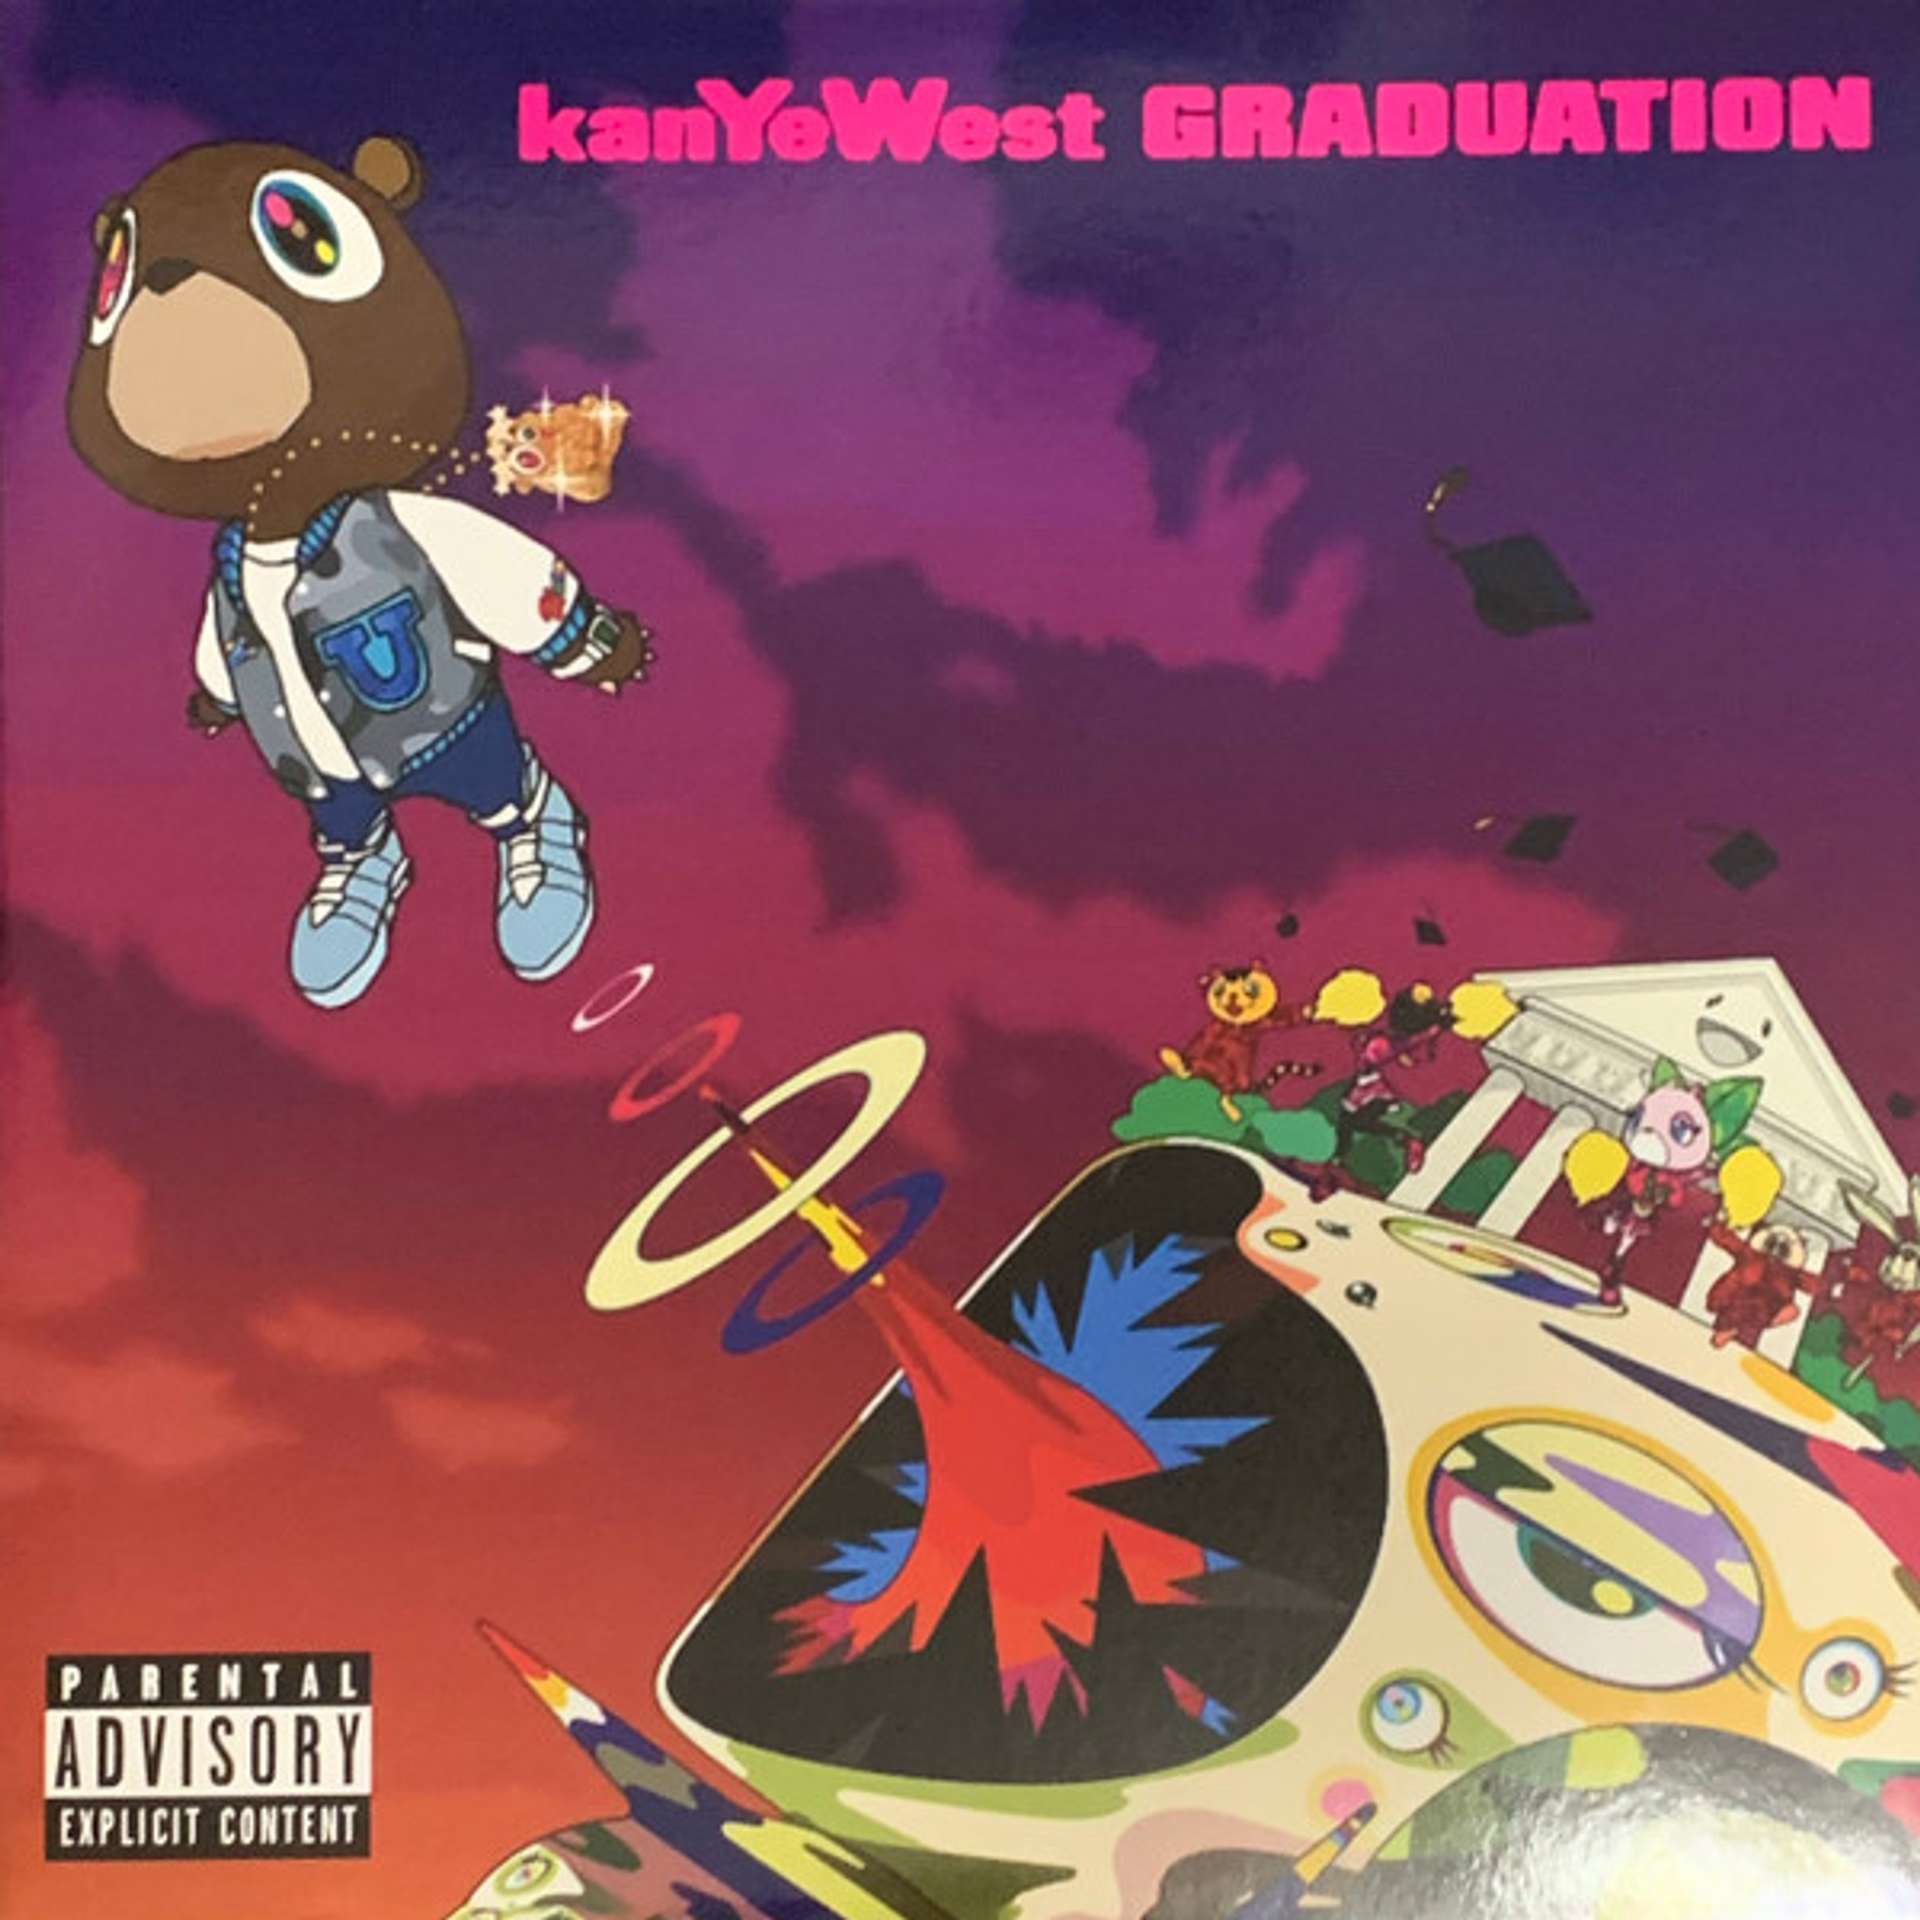 Kanye West's Graduation album cover, depicting a bear in streetwear being launched into a red and purple sky.